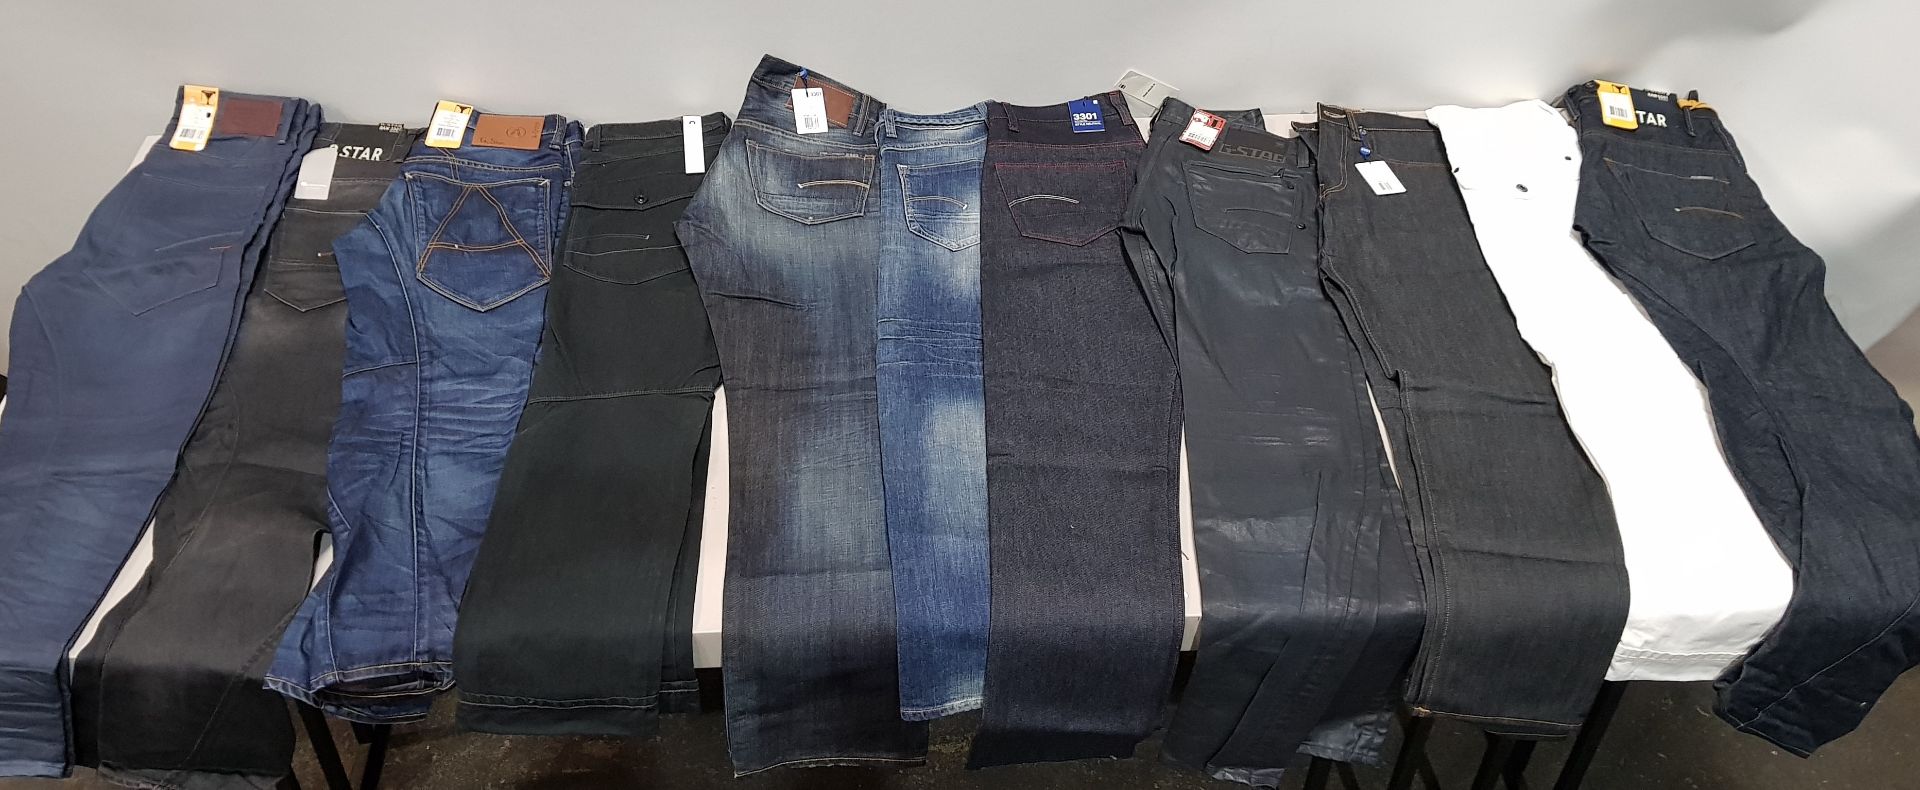 10 X BRAND NEW G-STAR JEANS IN VARIOUS STYLES AND SIZES